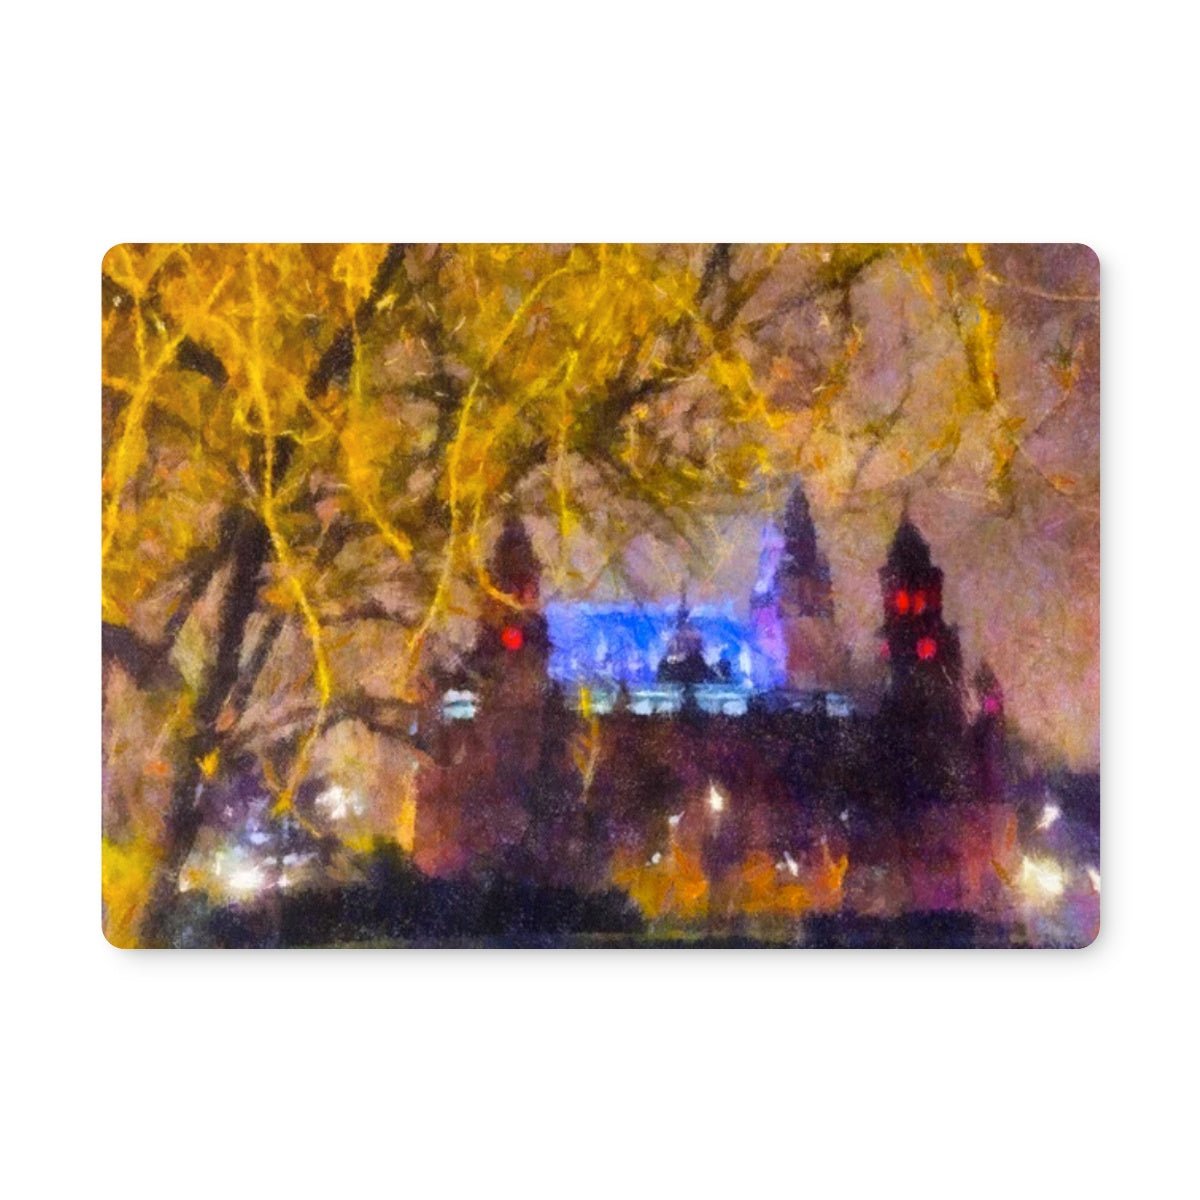 Kelvingrove Nights Glasgow Art Gifts Placemat-Placemats-Edinburgh & Glasgow Art Gallery-Single Placemat-Paintings, Prints, Homeware, Art Gifts From Scotland By Scottish Artist Kevin Hunter